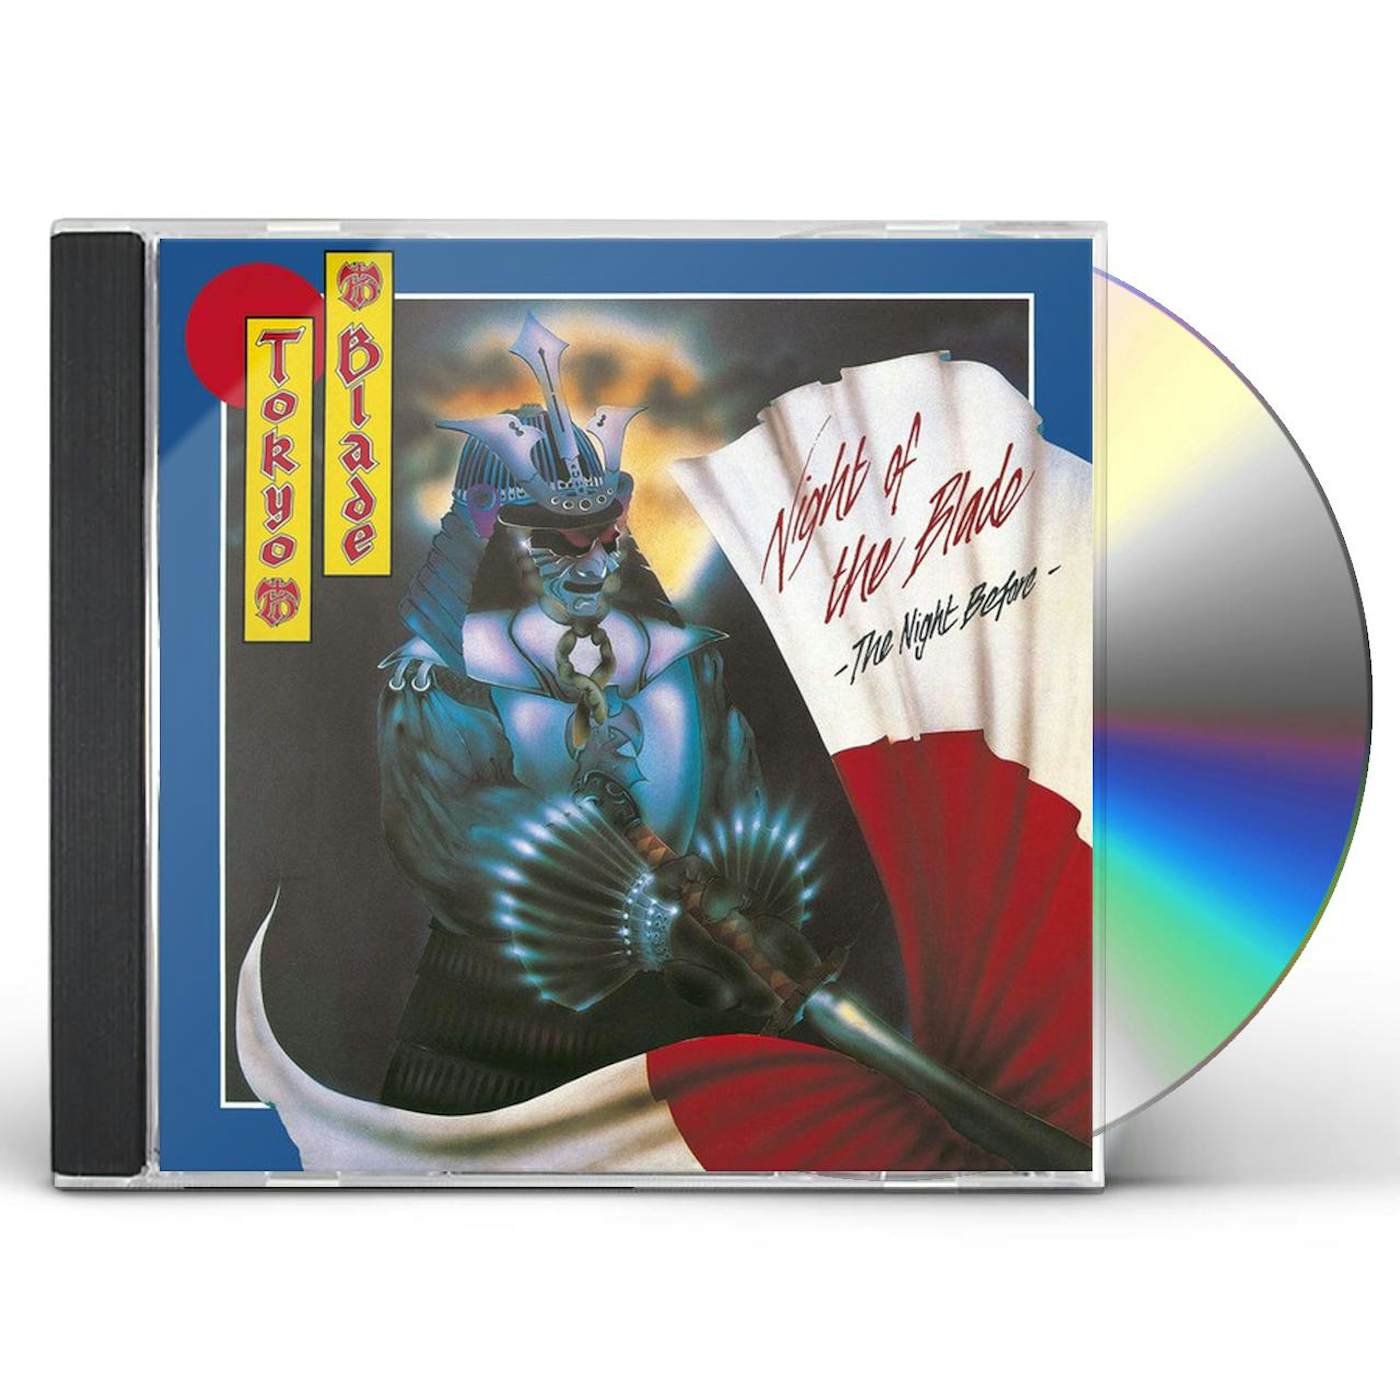 Tokyo Blade Night Of The Blade   The Night Before CD